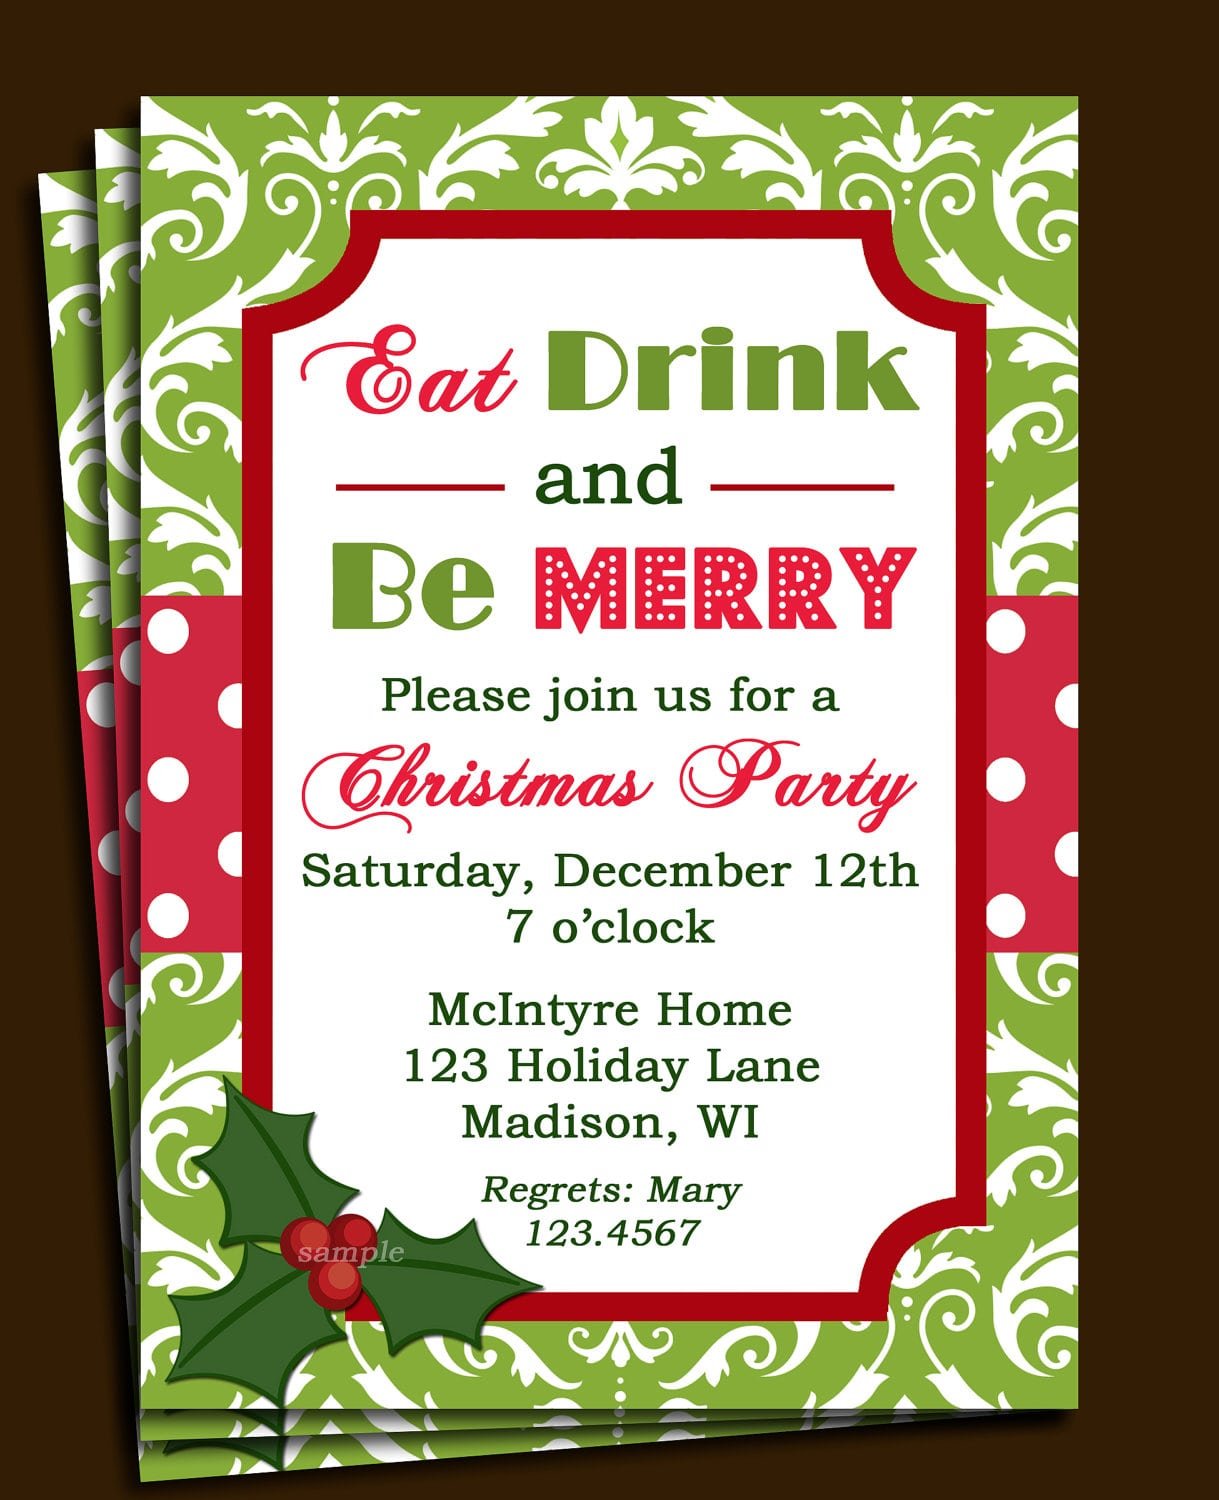 Office Christmas Party Invitation Wording Cool Office Christmas